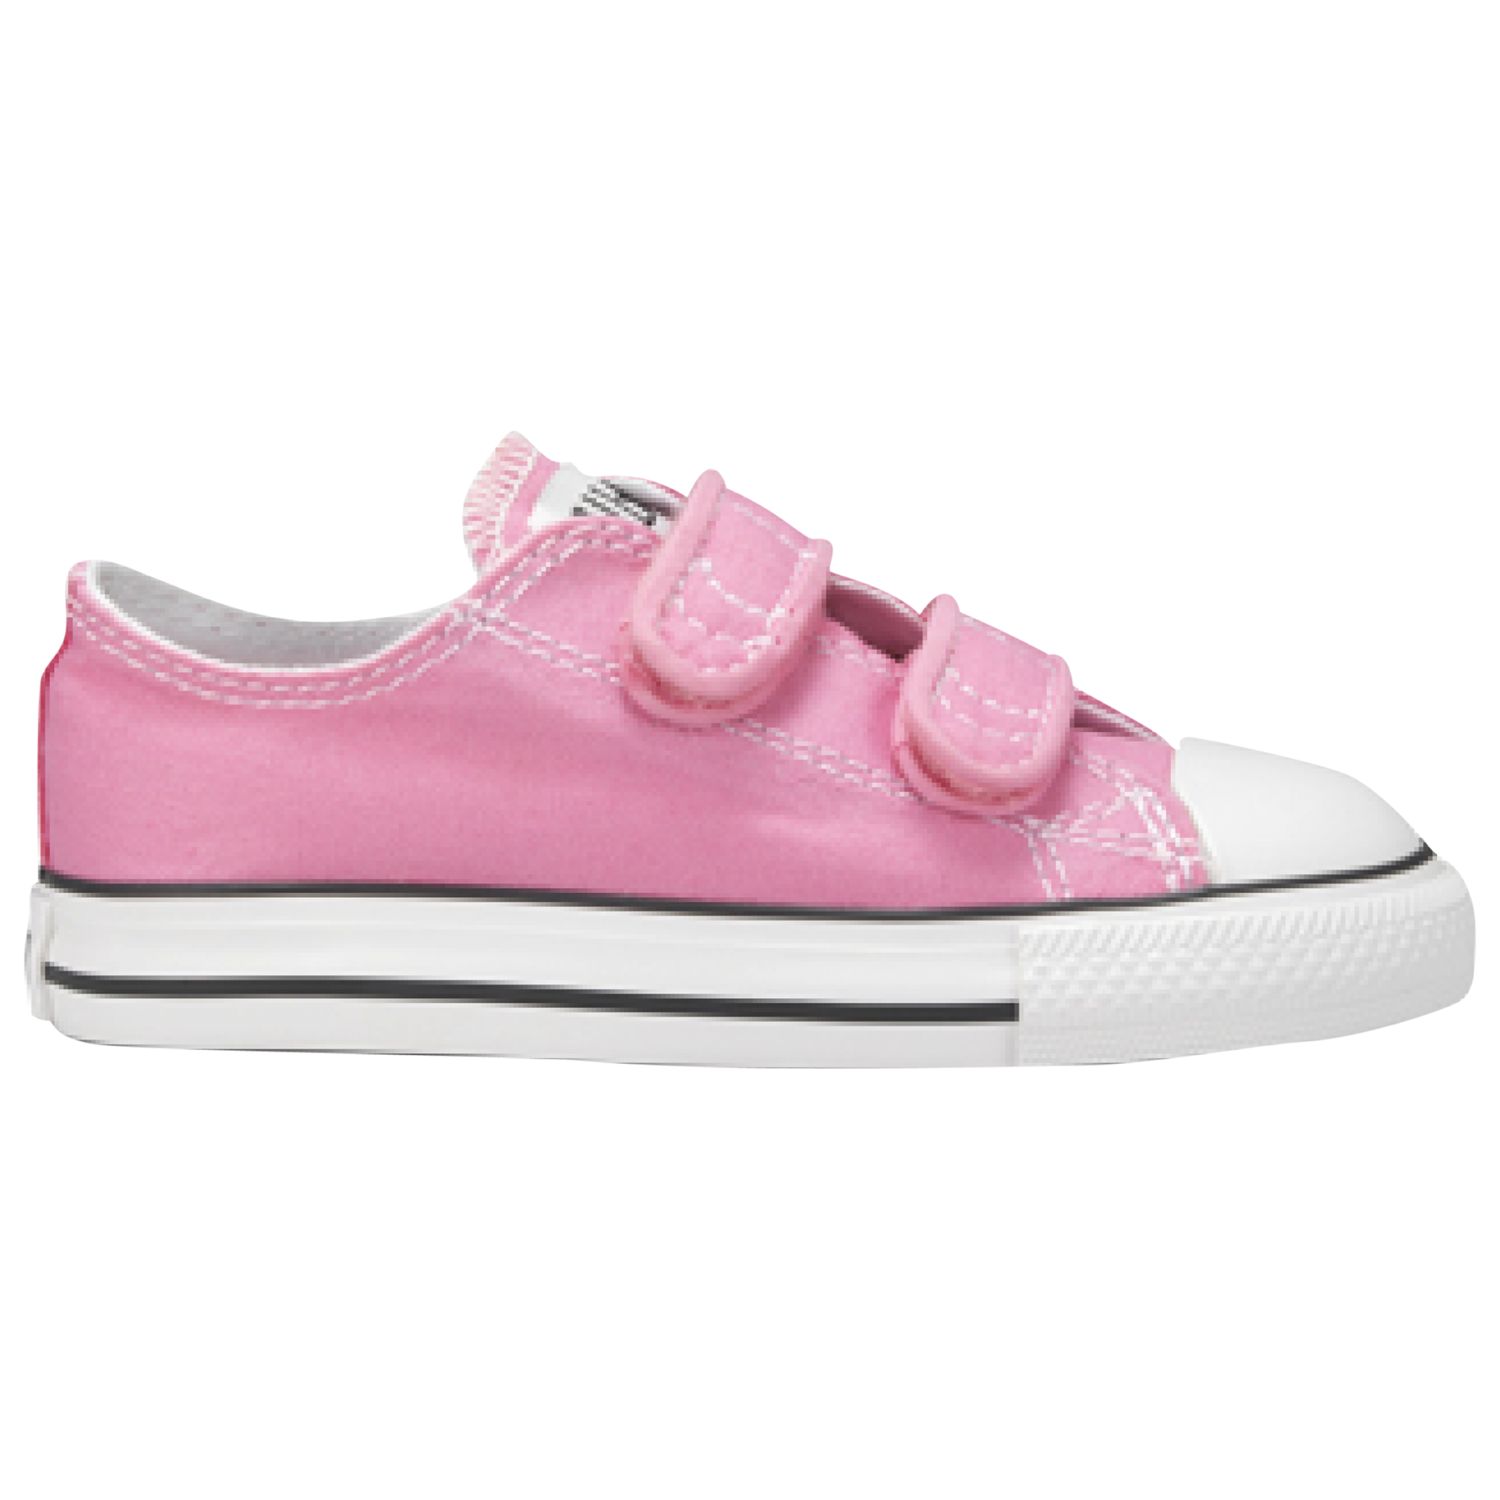 Converse Children's Chuck Taylor All Star Riptape Trainers, Pink, 10 Jnr